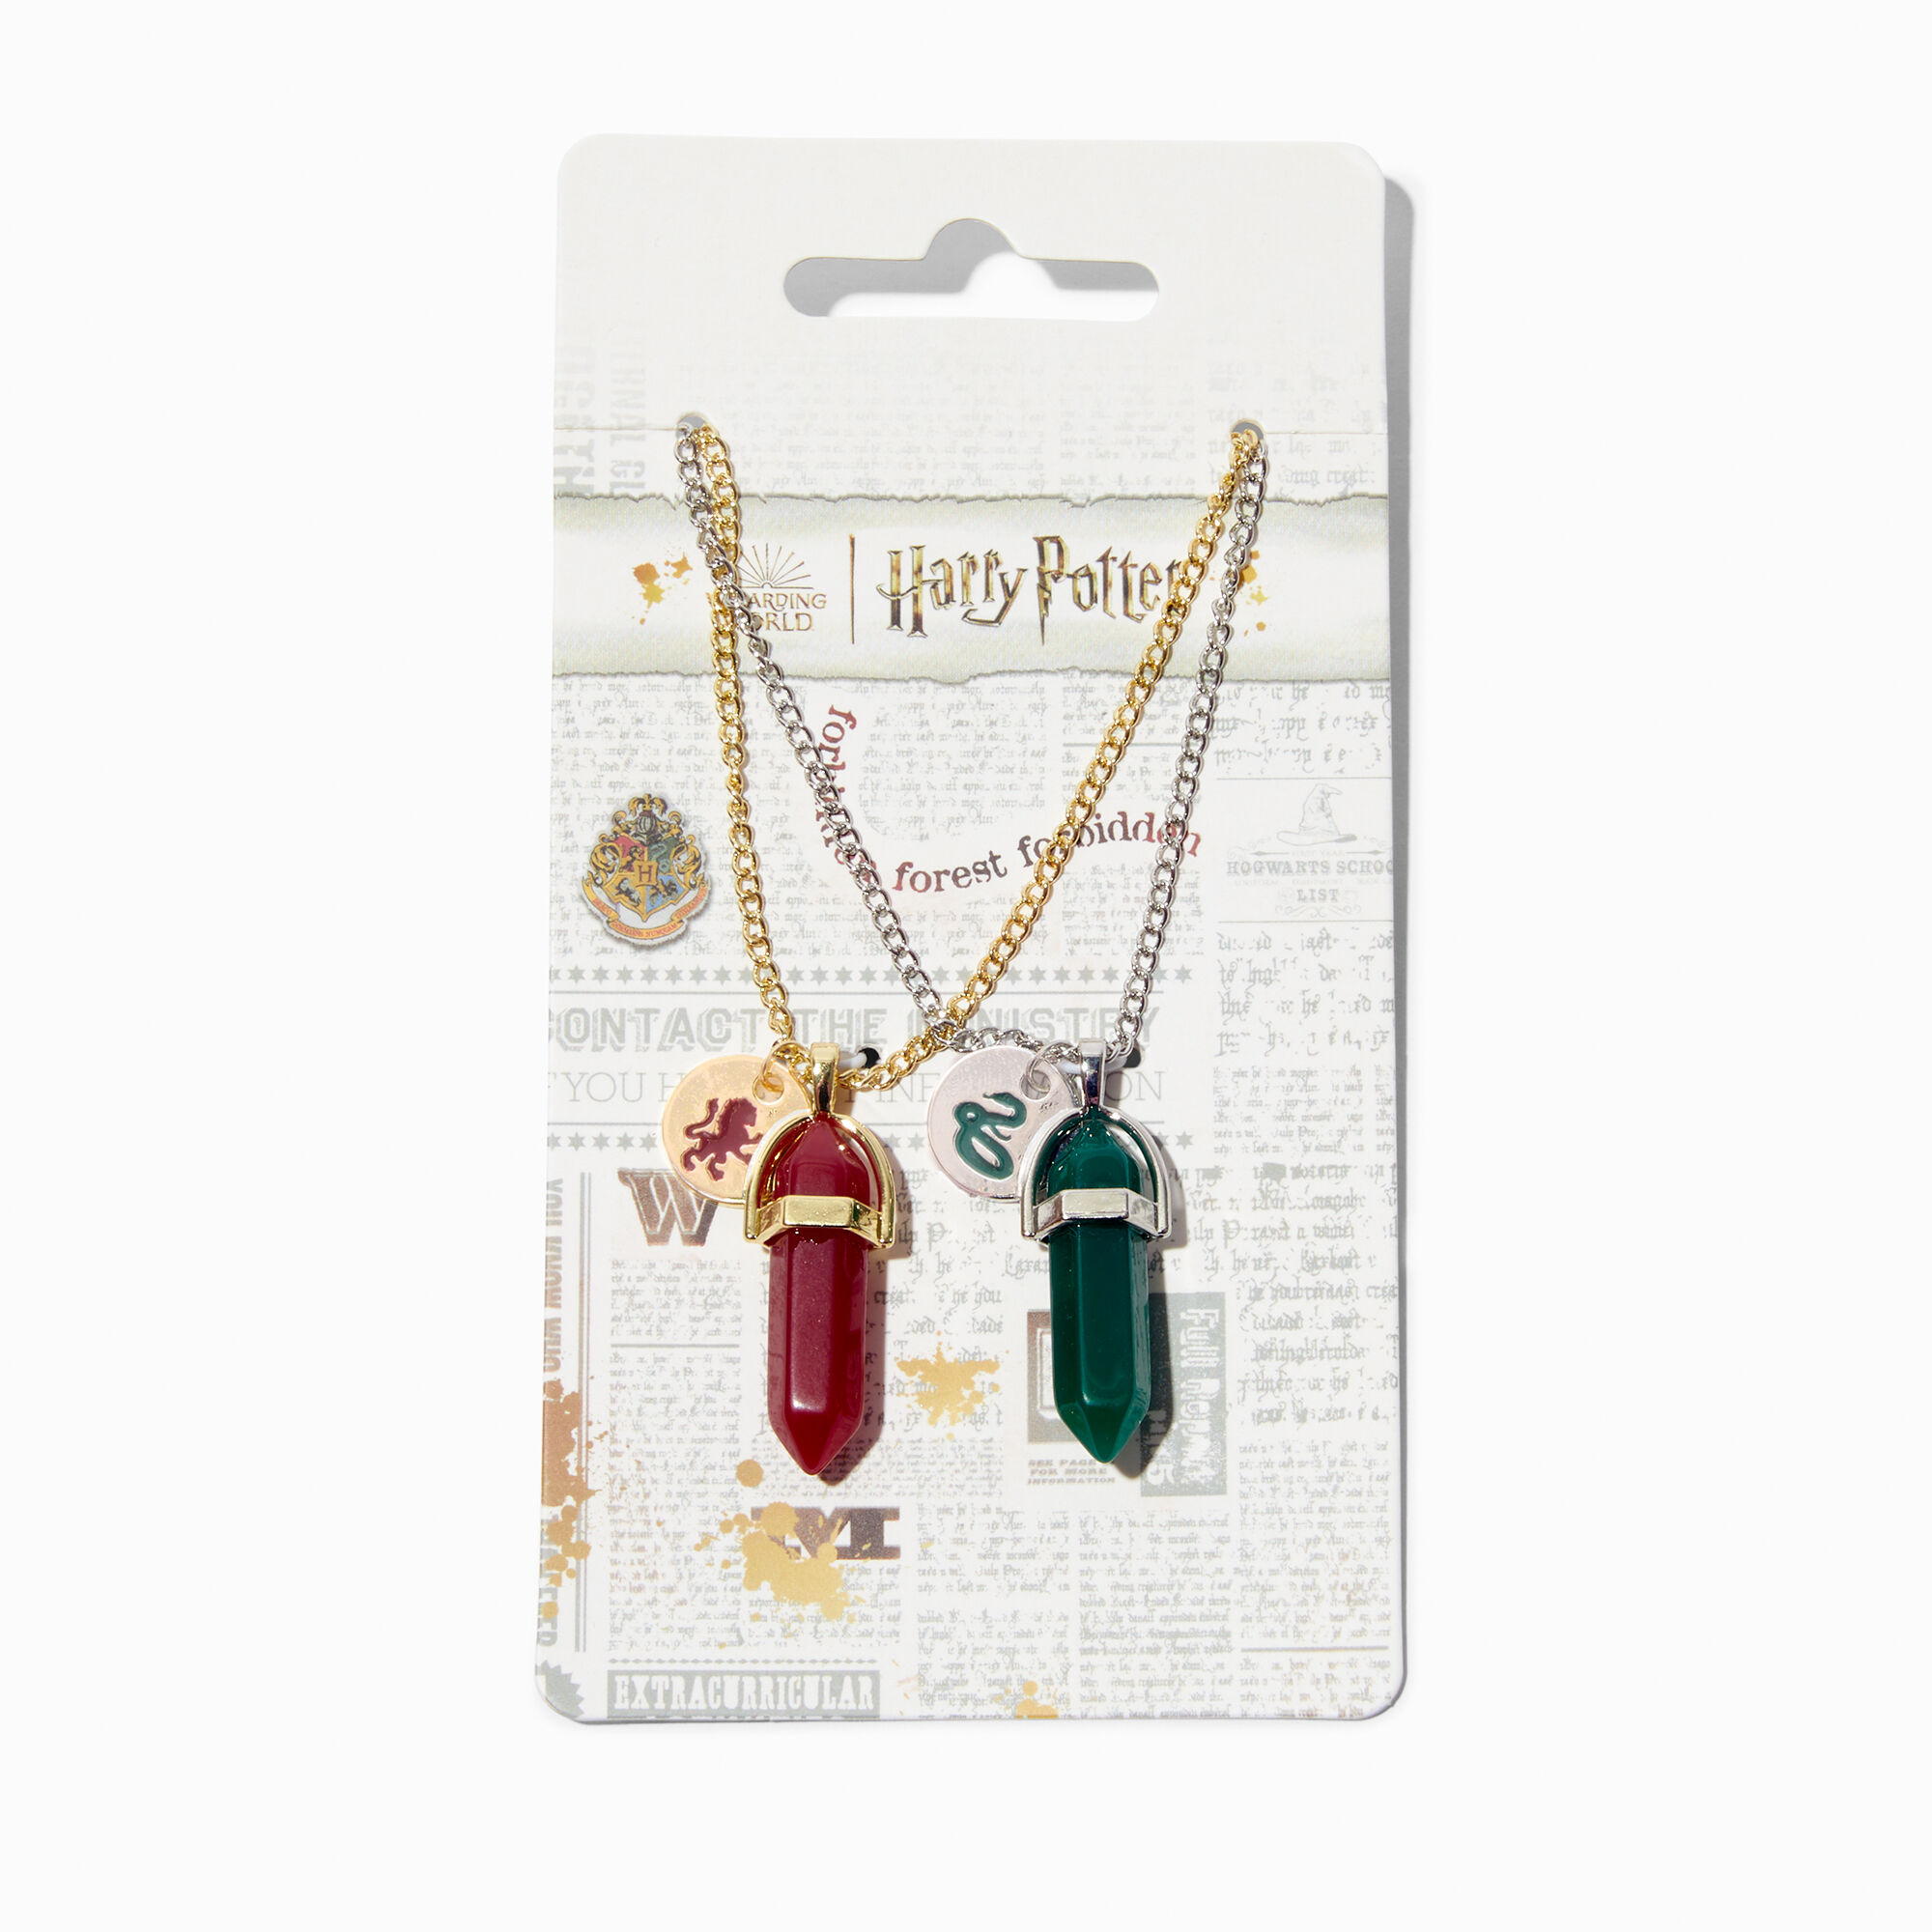 View Claires Harry Potter Gryffindor And Slytherin Crystal Necklace 2 Pack Red information